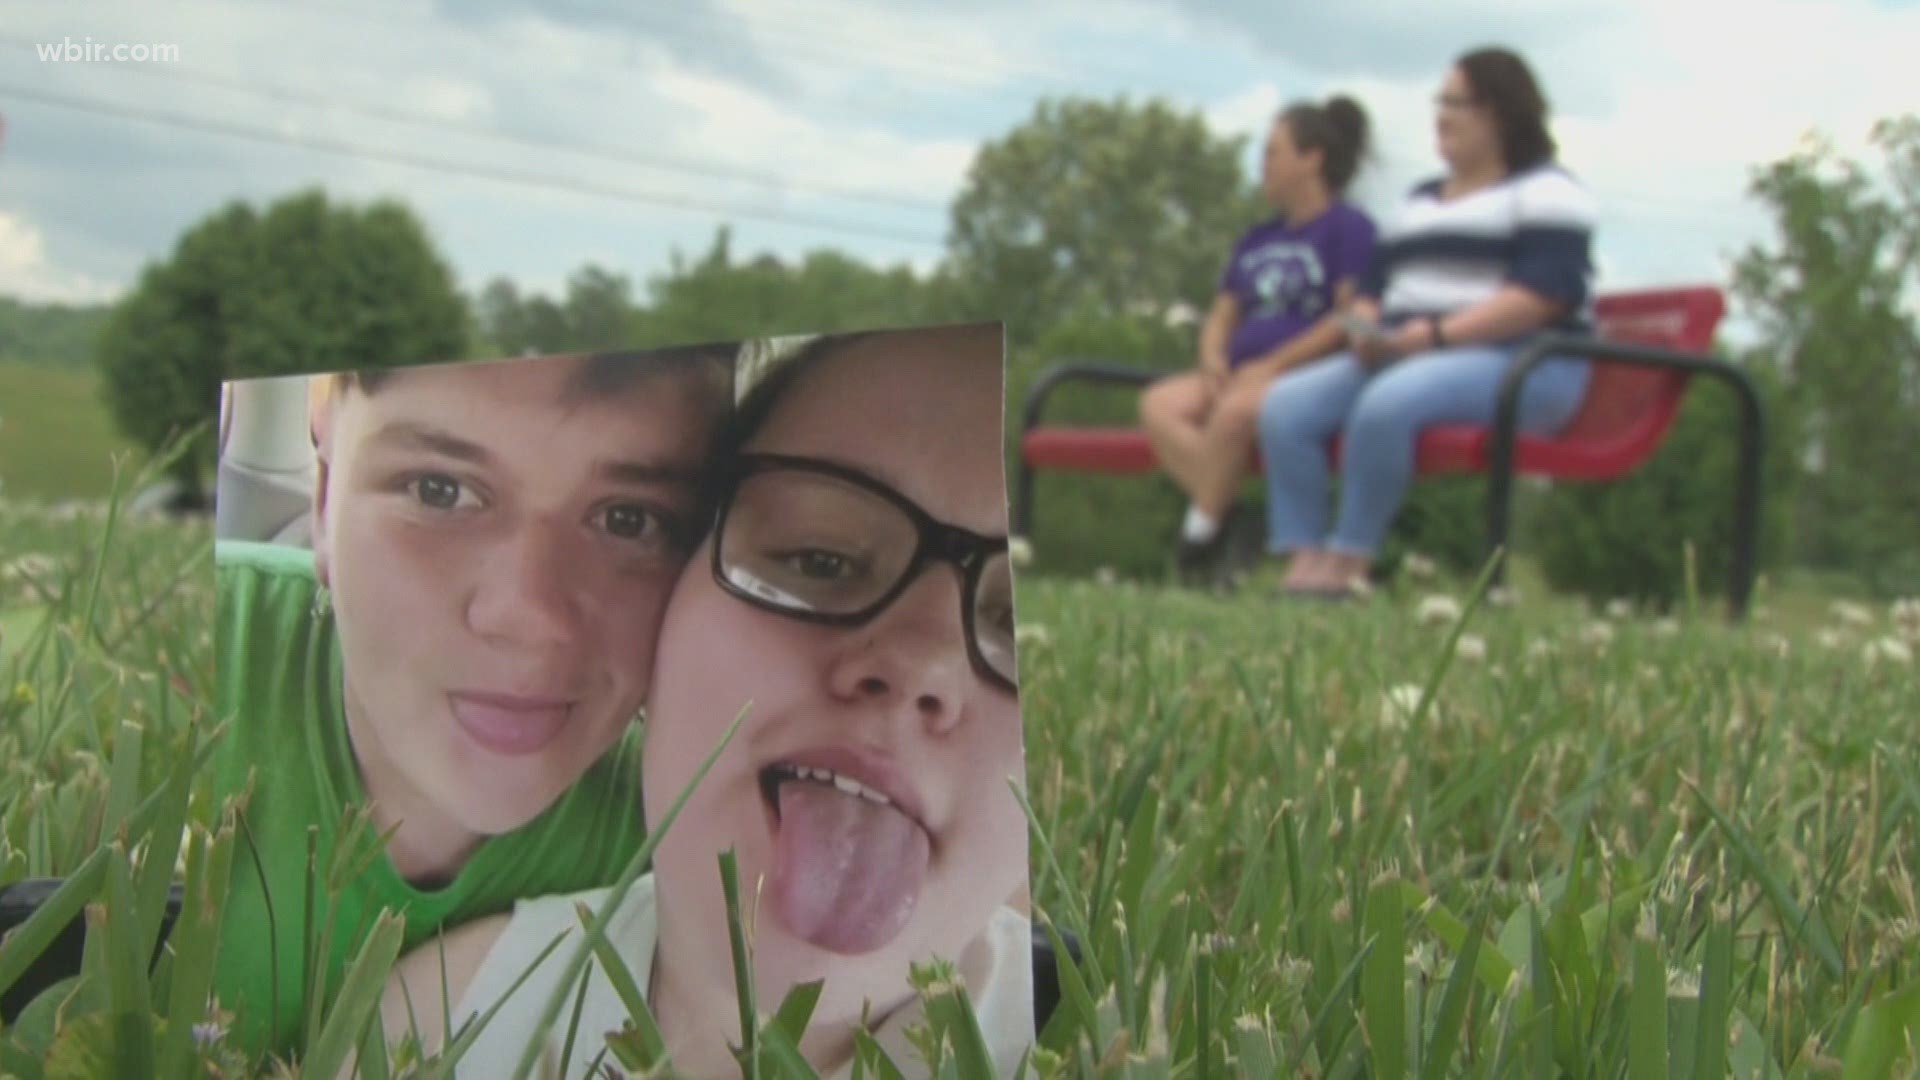 A Scott County mother is on a mission to raise awareness about suicide.